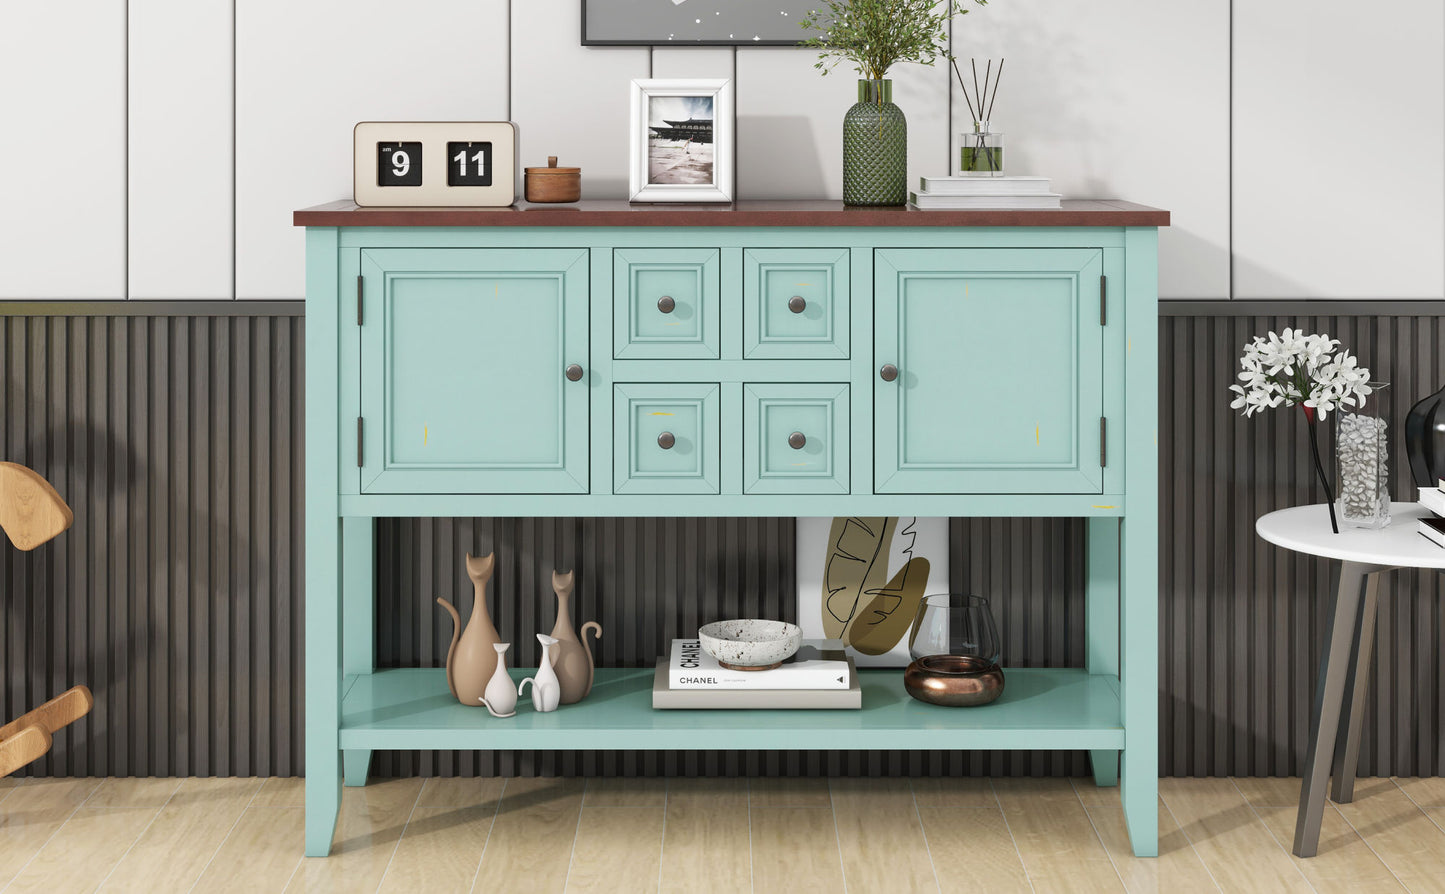 Cambridge Series Ample Storage Vintage console table with Four Small Drawers and Bottom Shelf for Living Rooms, Entrances and Kitchens (Retro Blue, OLD SKU: WF190263AAC)